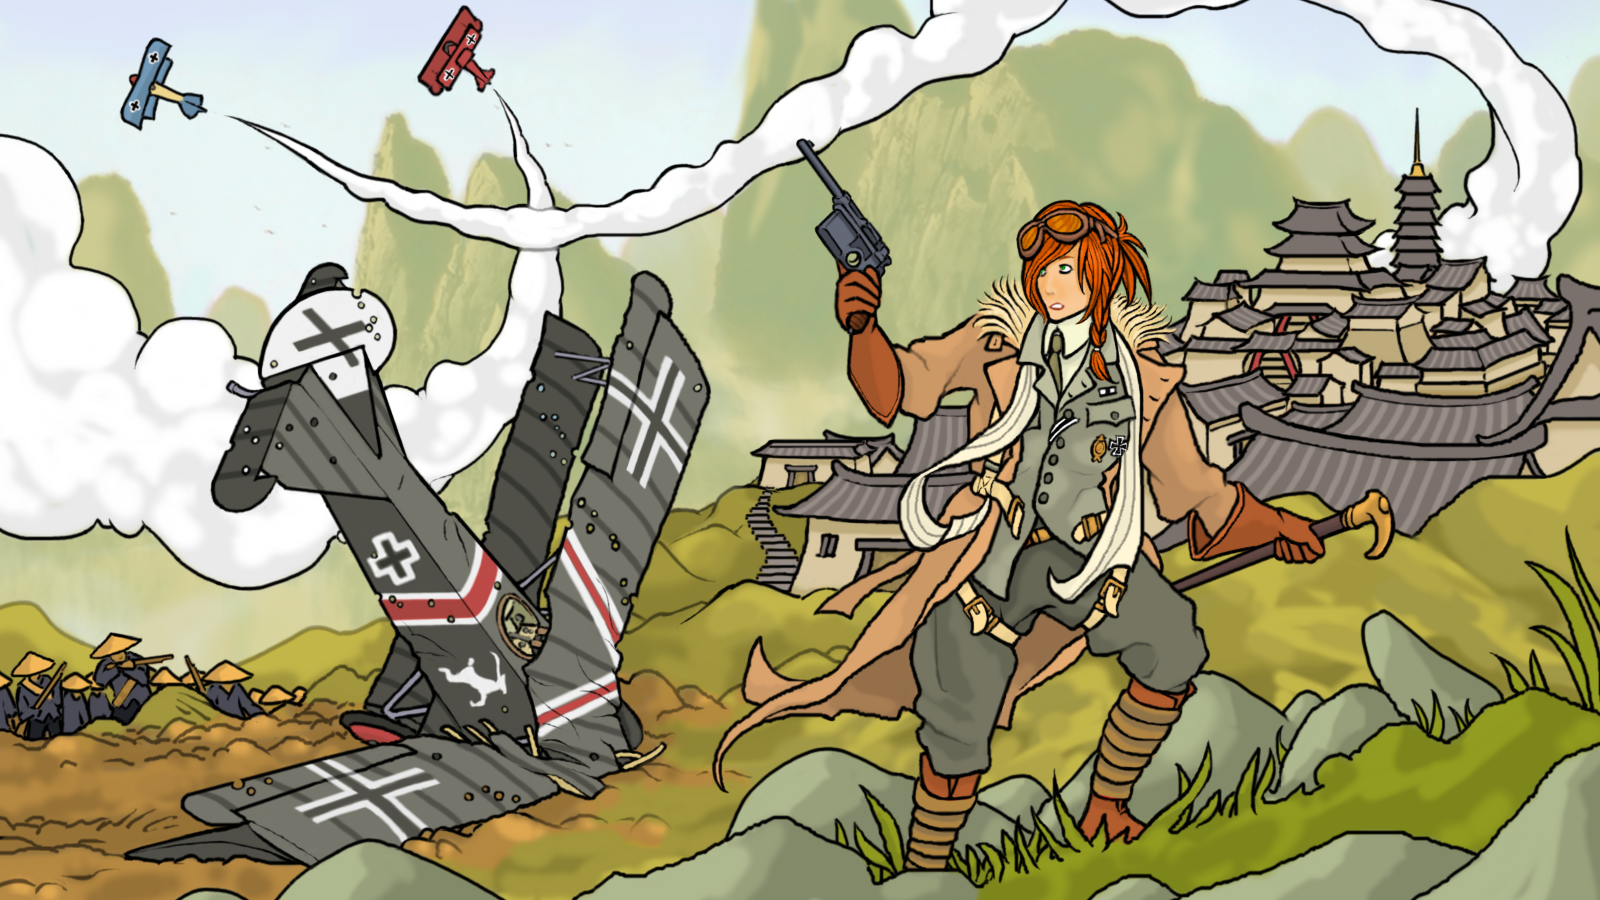 the_valkyrie_s_last_ride_by_colorcopycenter-db5irt4.png